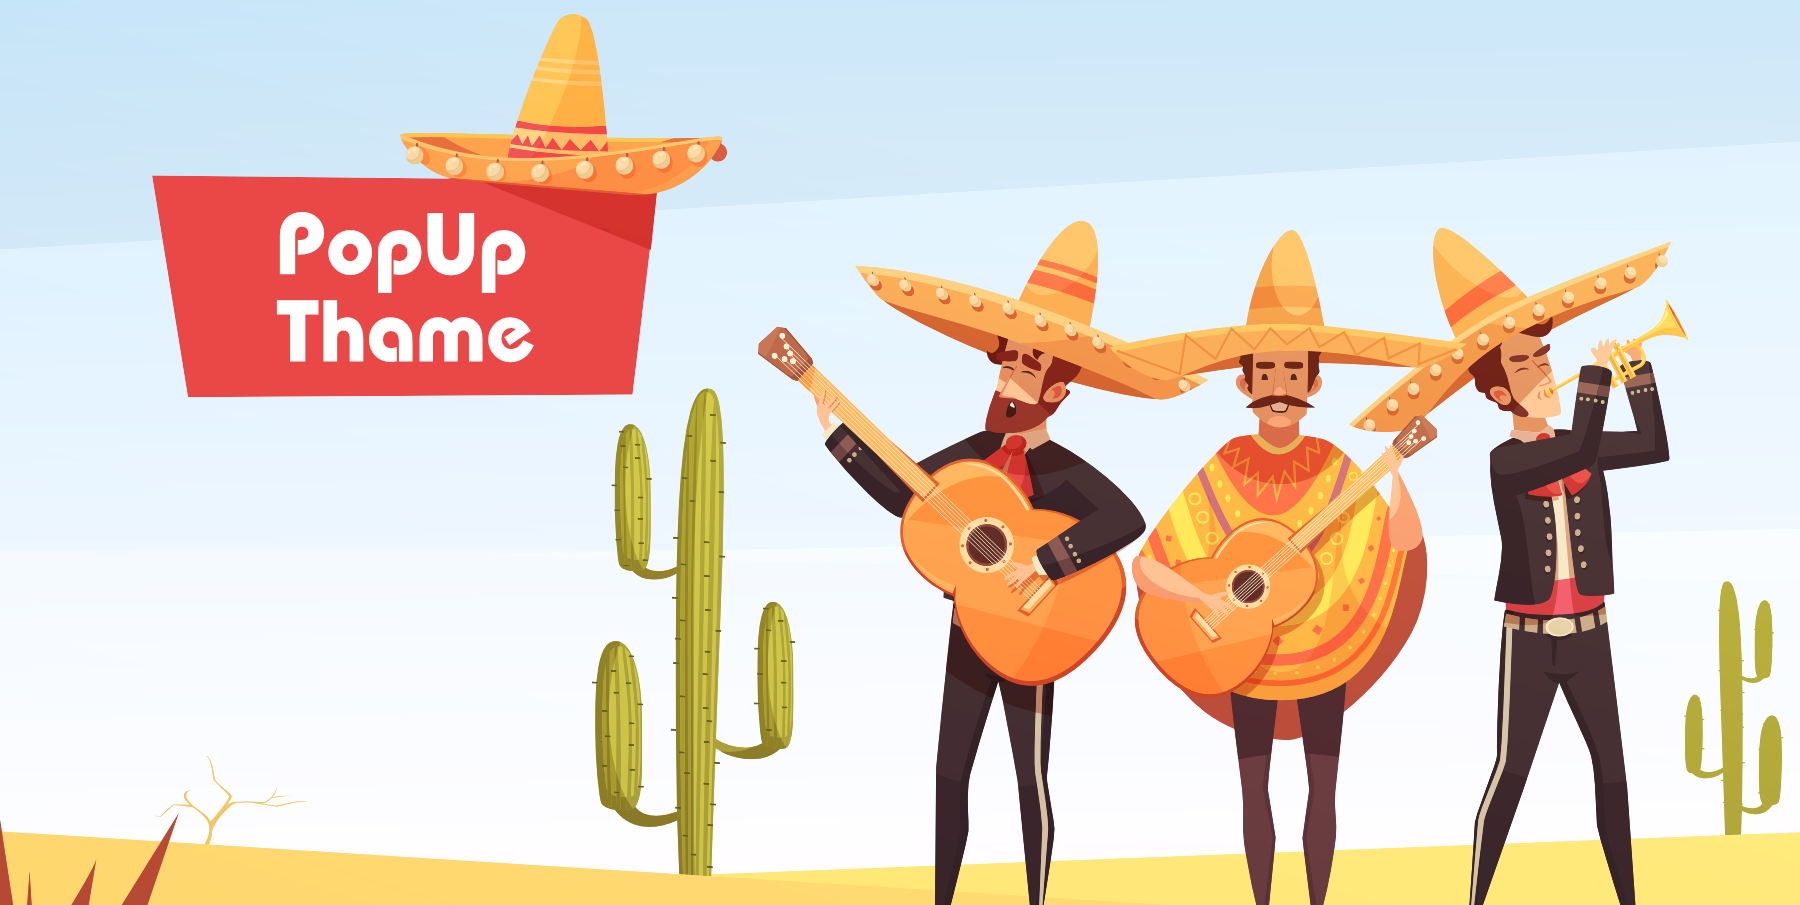 PopUp Thame - Mexican takeaway/delivery in and around Thame, Oxfordshire